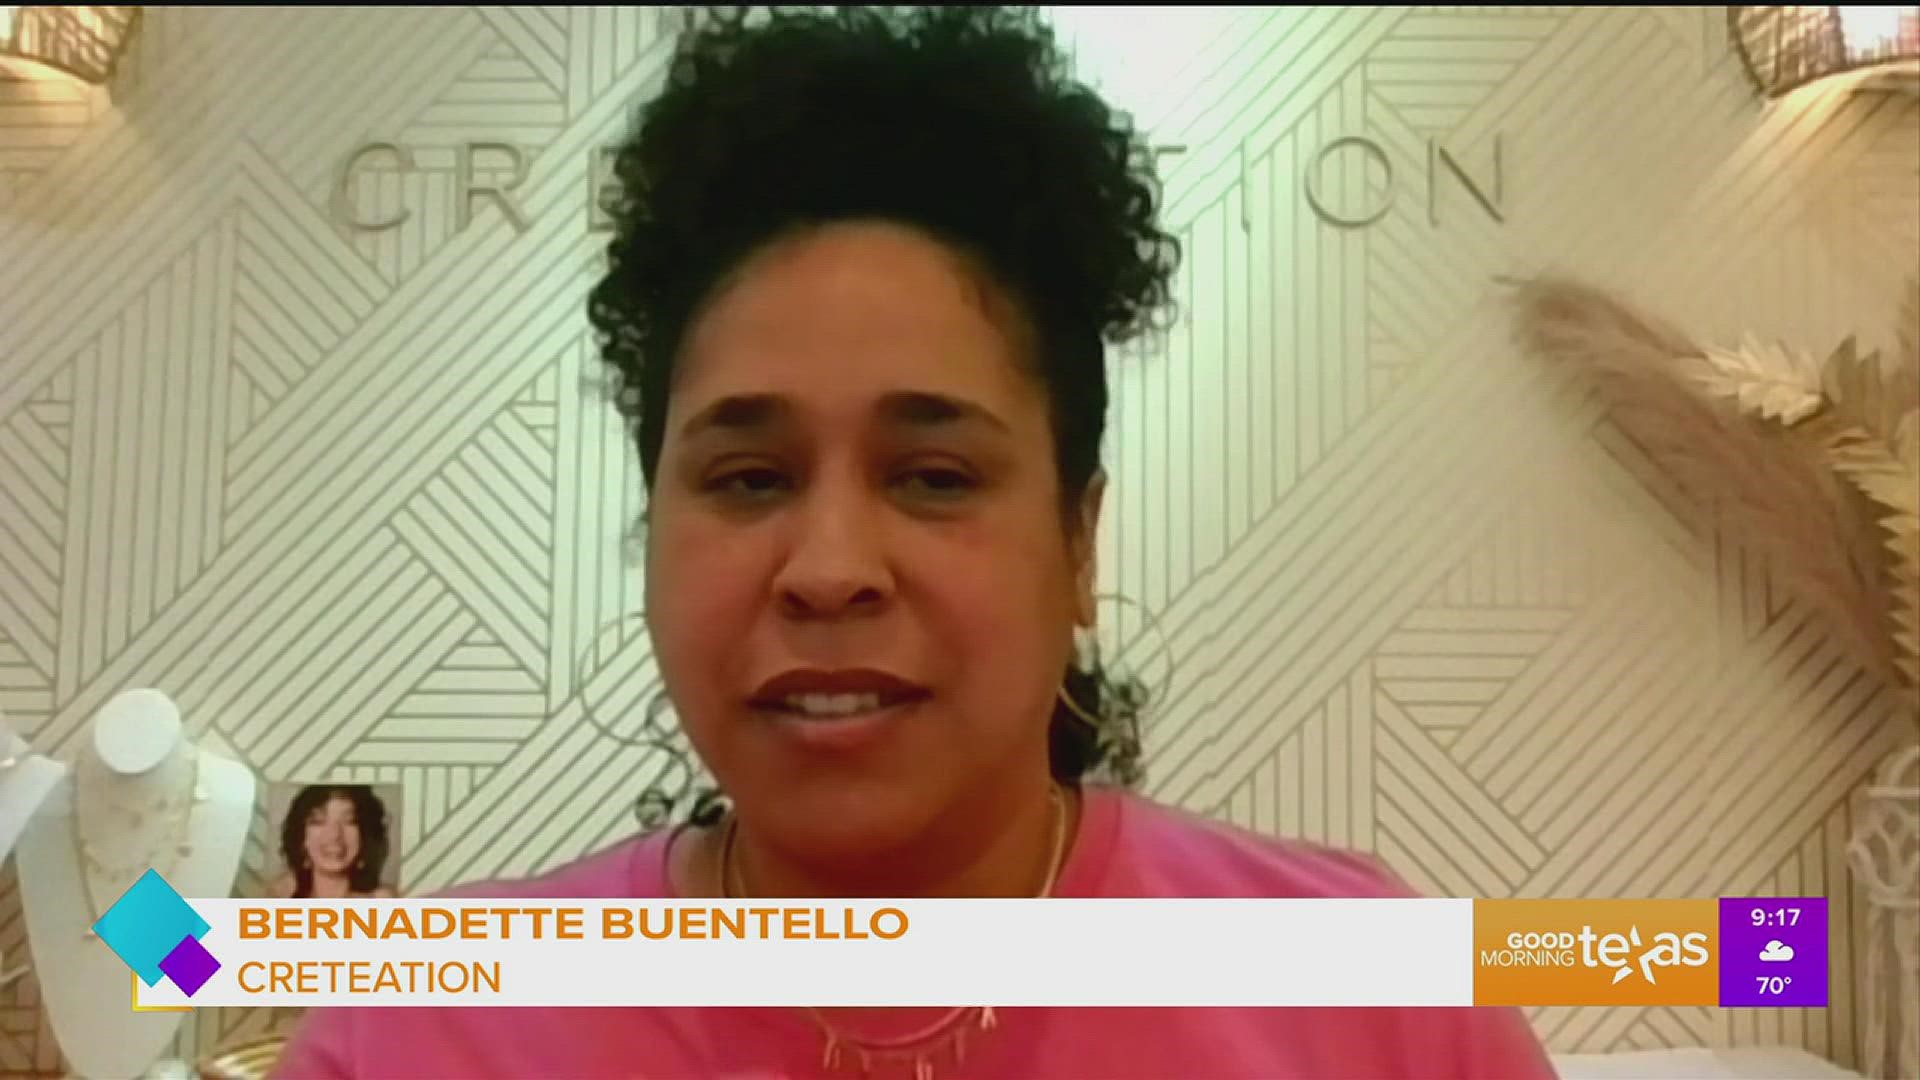 Owner and founder Bernadette Buenthello shares her story and the cement jewelry concept behind her hand-crafted line, Creteation.